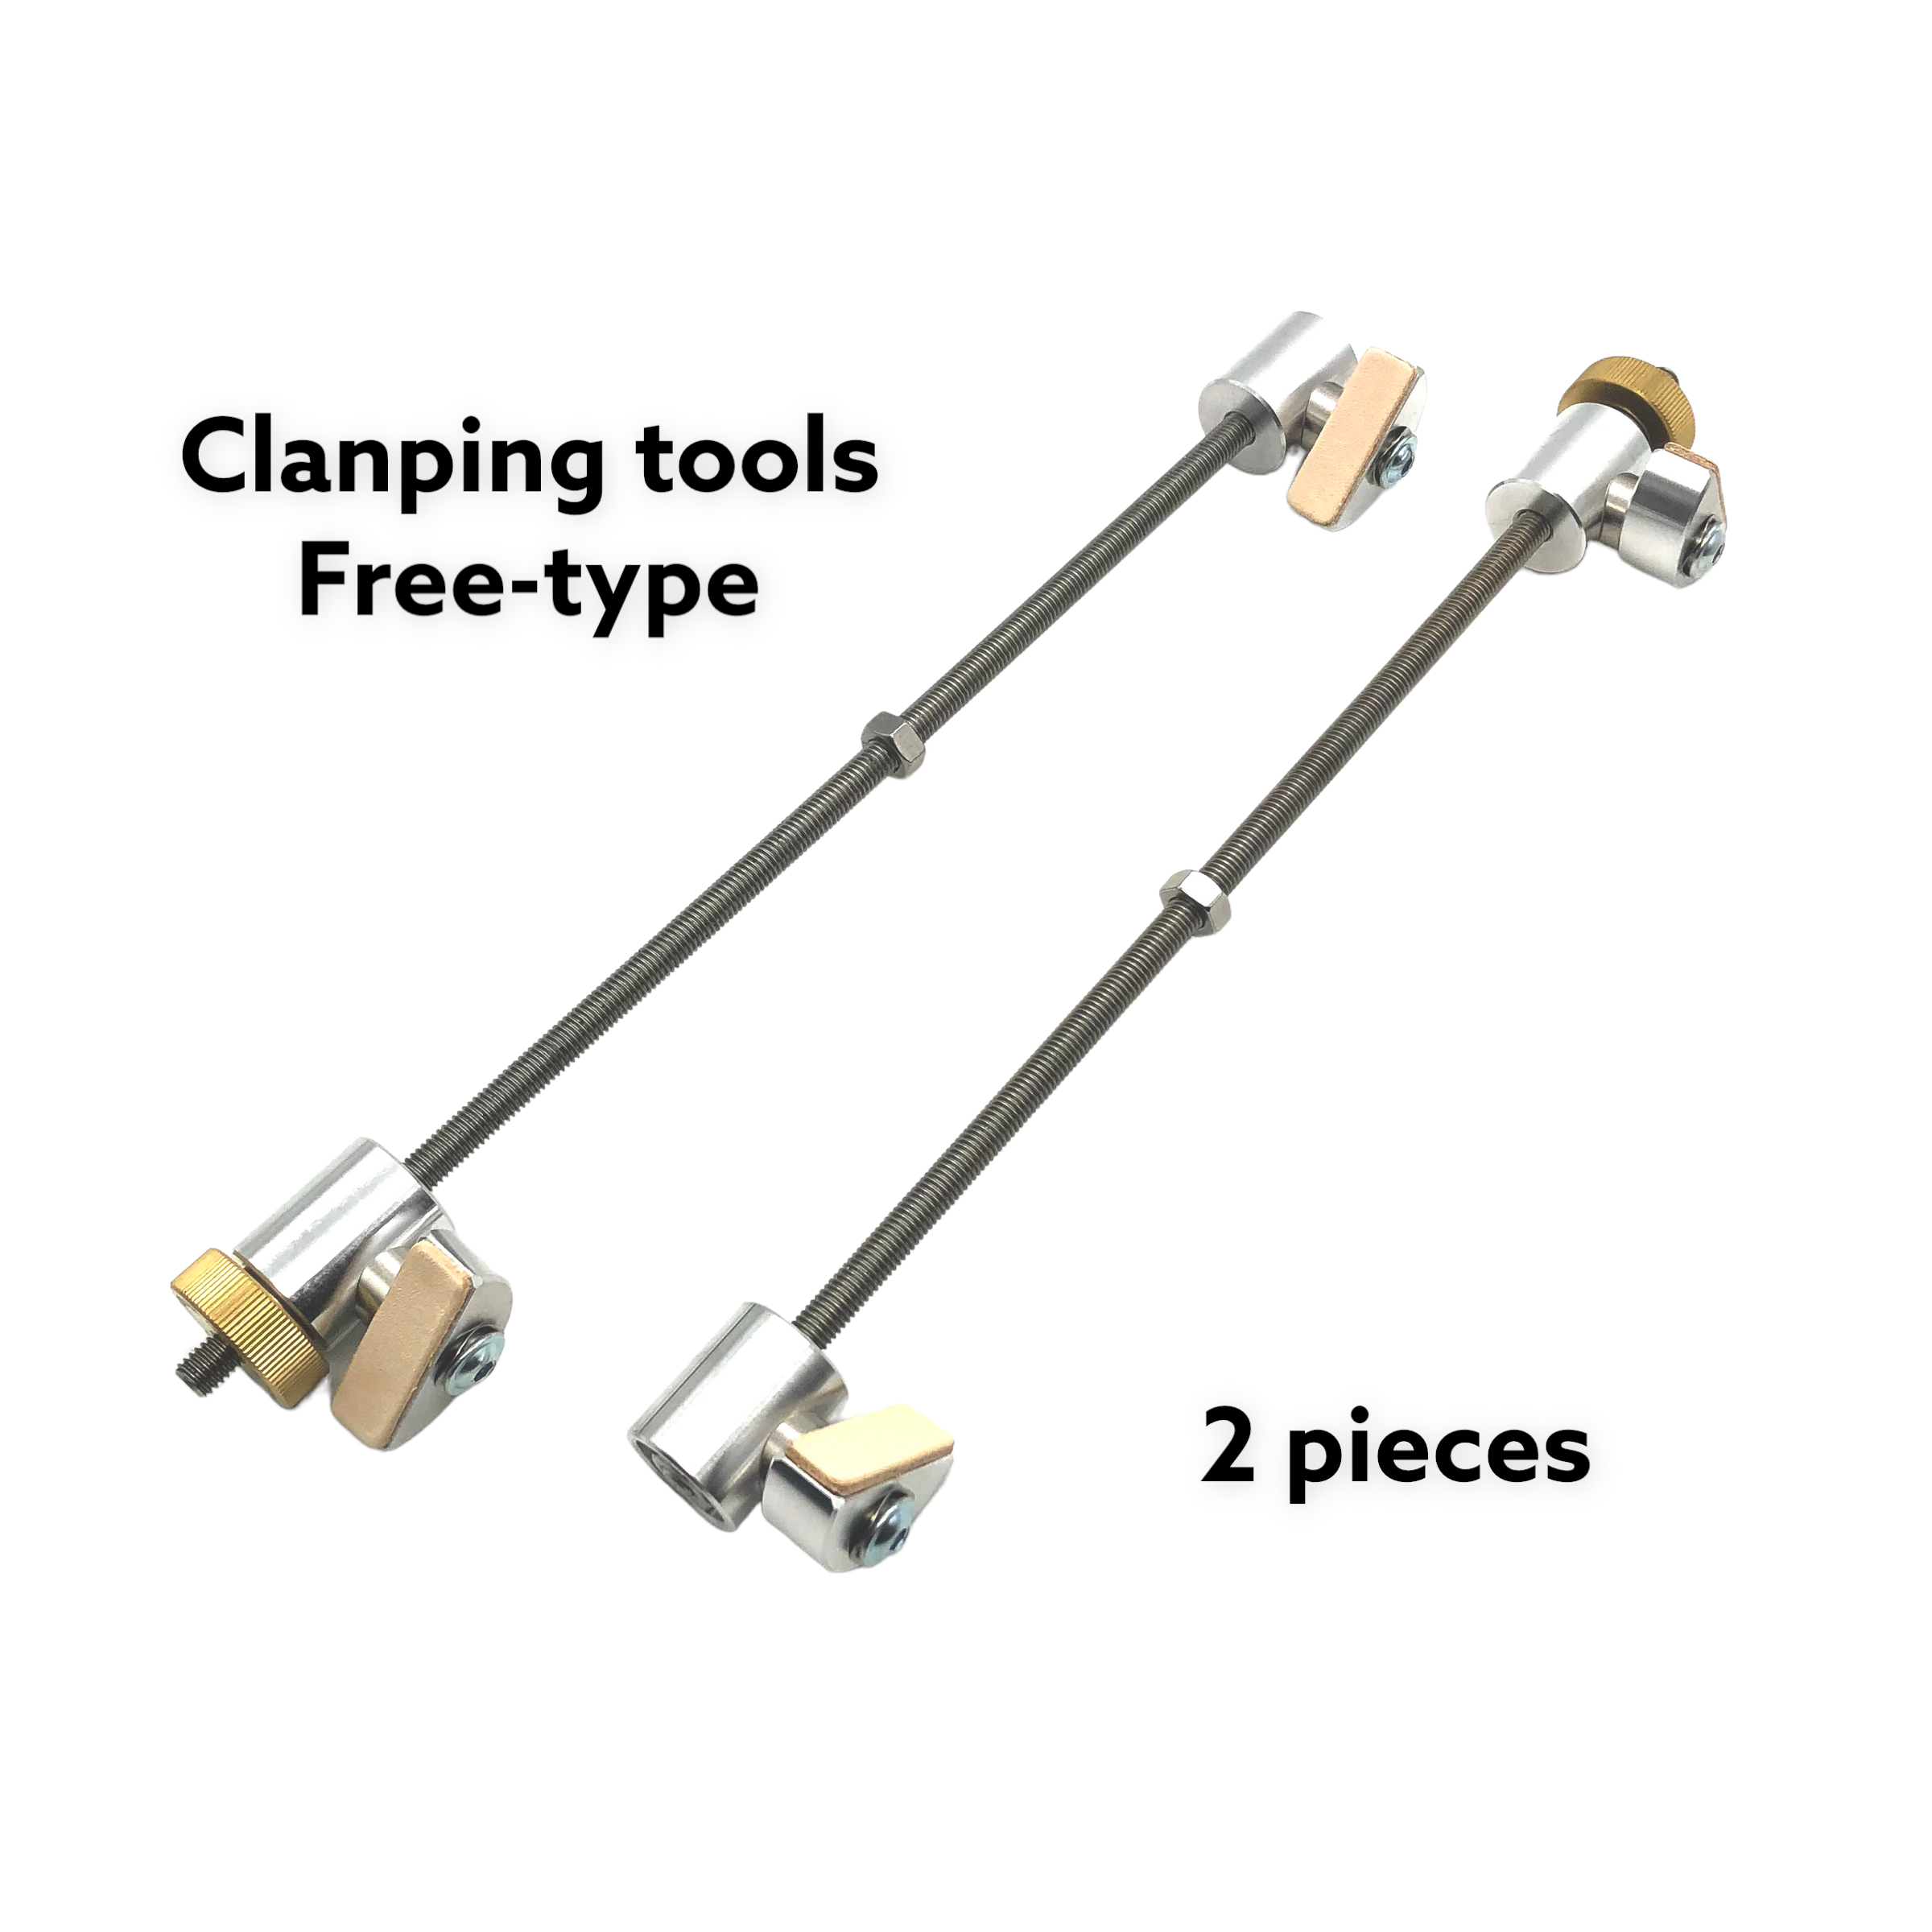 Clamping tools (Free-type)